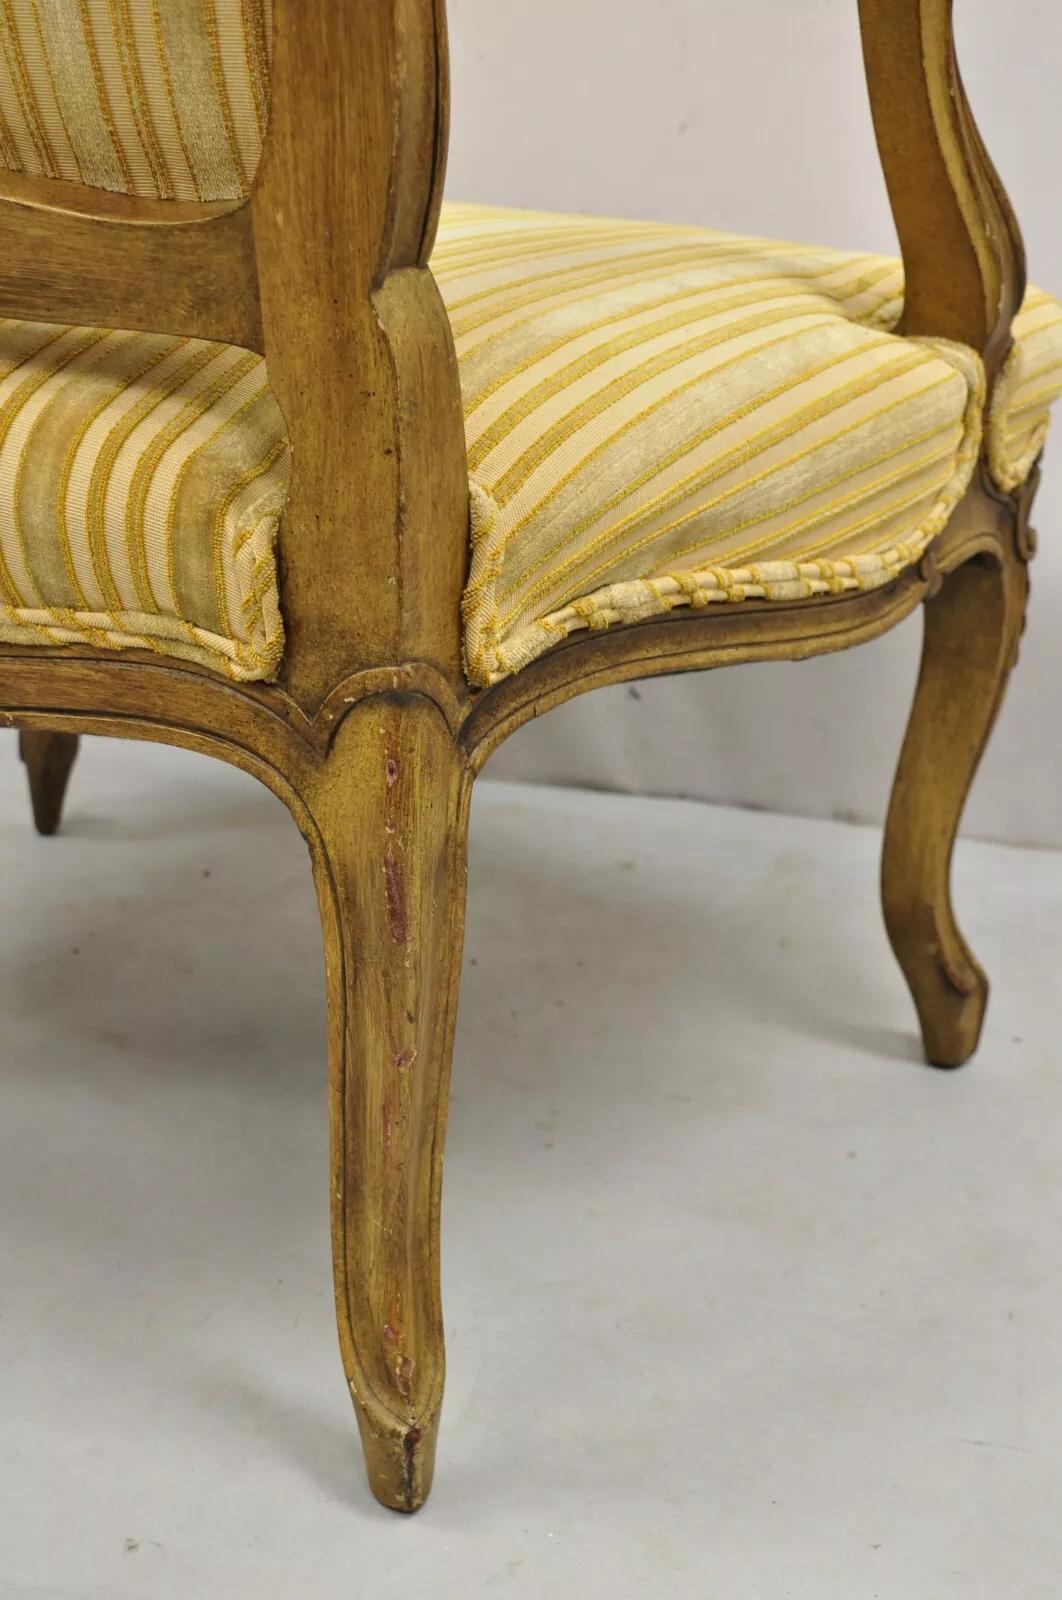 Vintage French Louis XV Style Carved Walnut Fauteuil Parlor Lounge Arm Chair For Sale 5